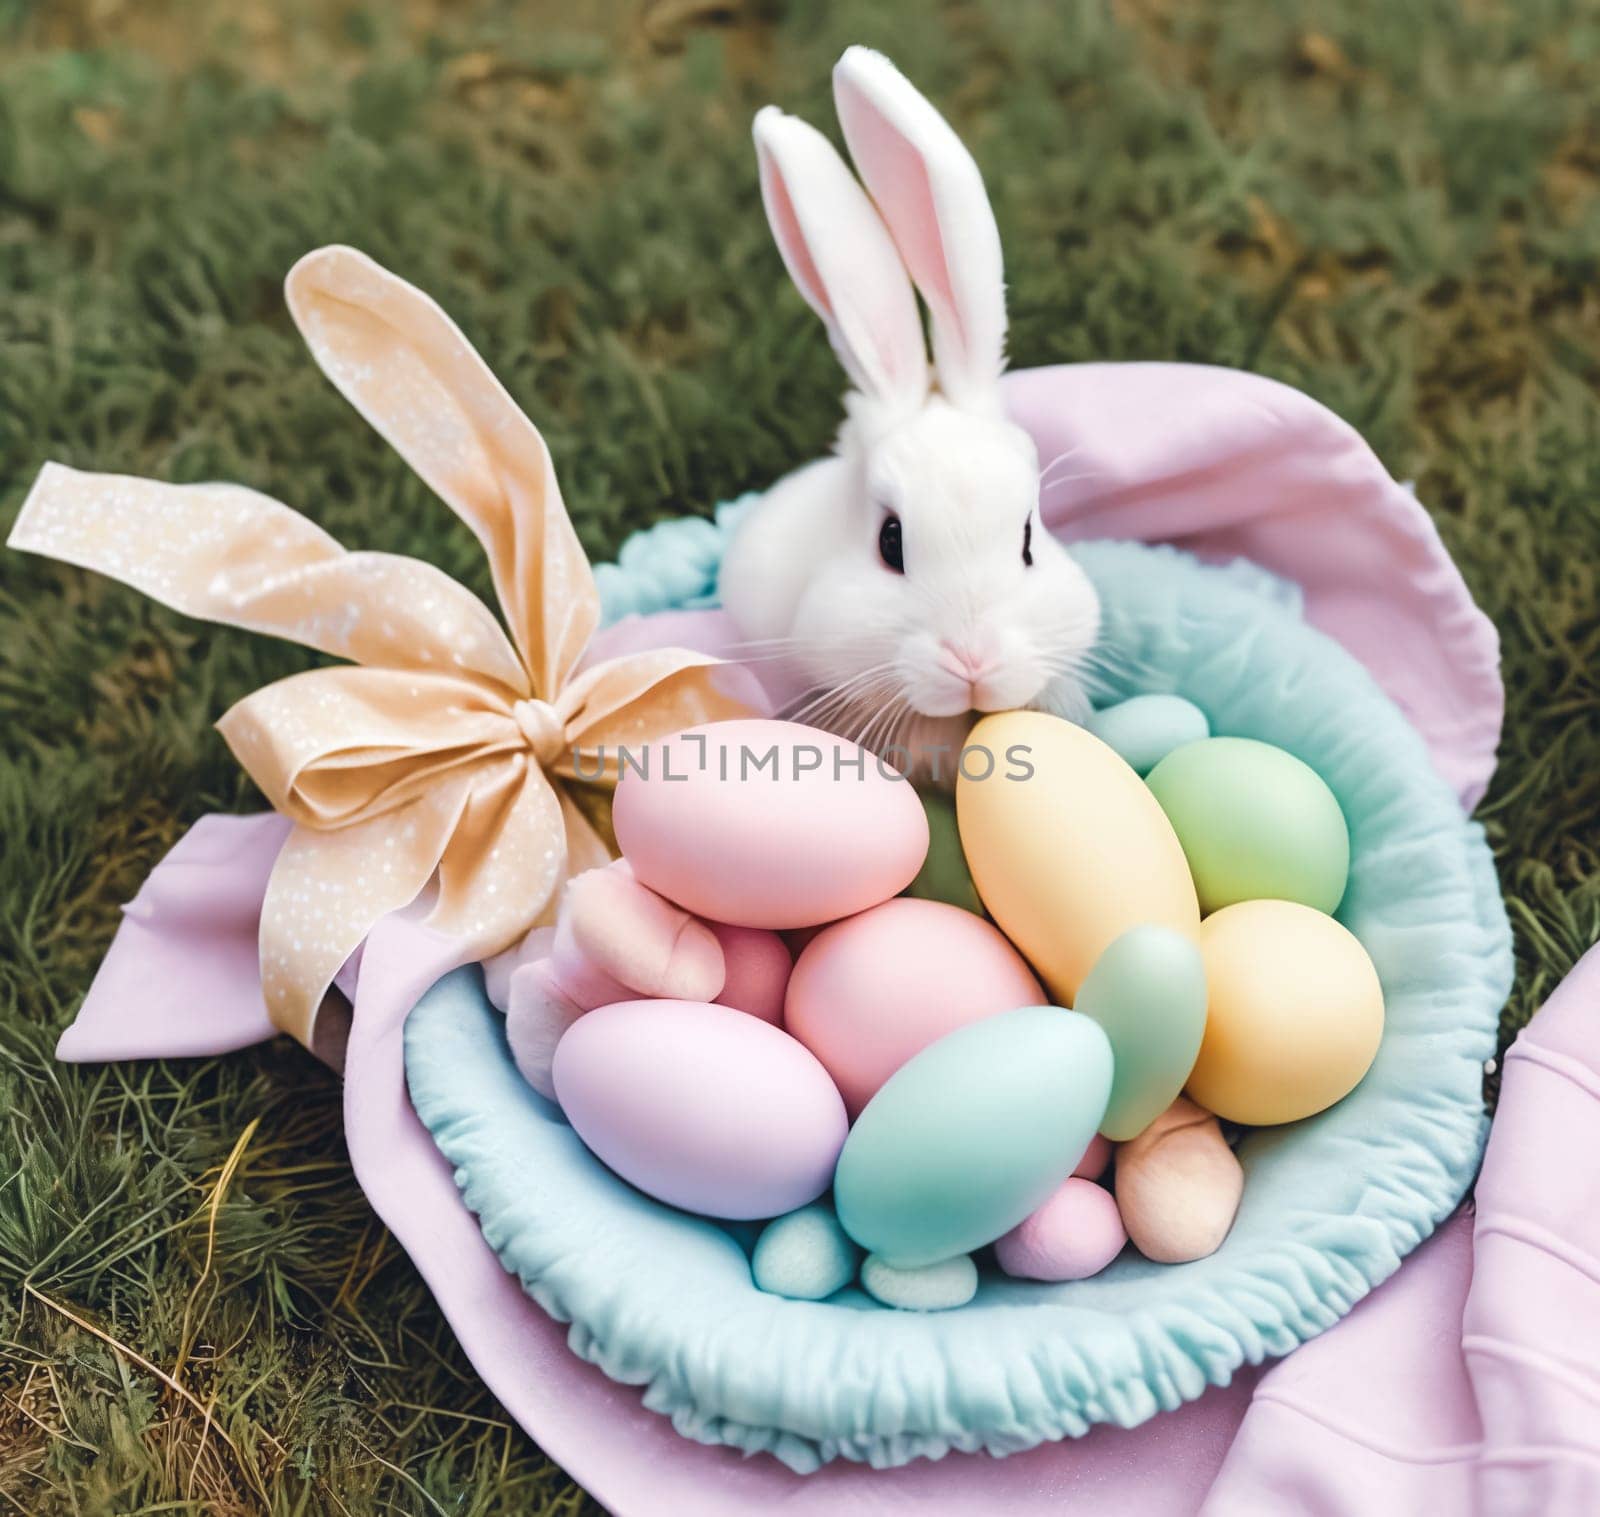 Adorable Bunny Decor. A charming arrangement of plush Easter bunny toys, pastel-colored ribbons, and decorative eggs by GoodOlga